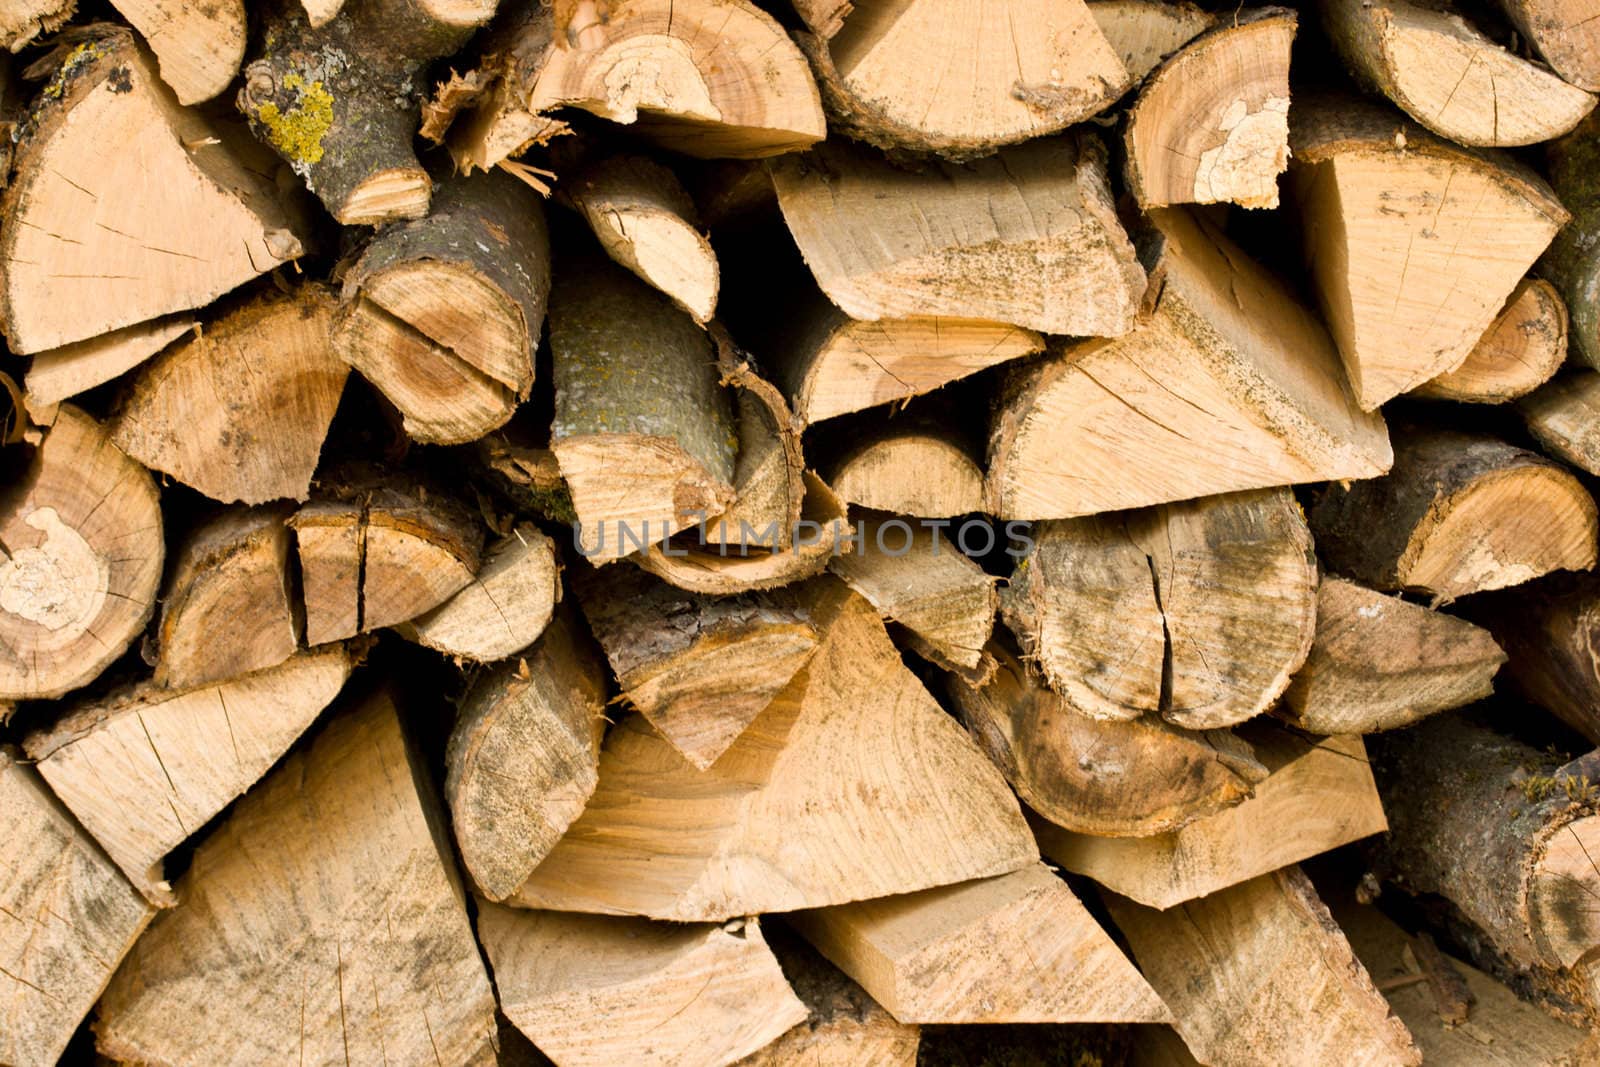 Firewood pile by dimol